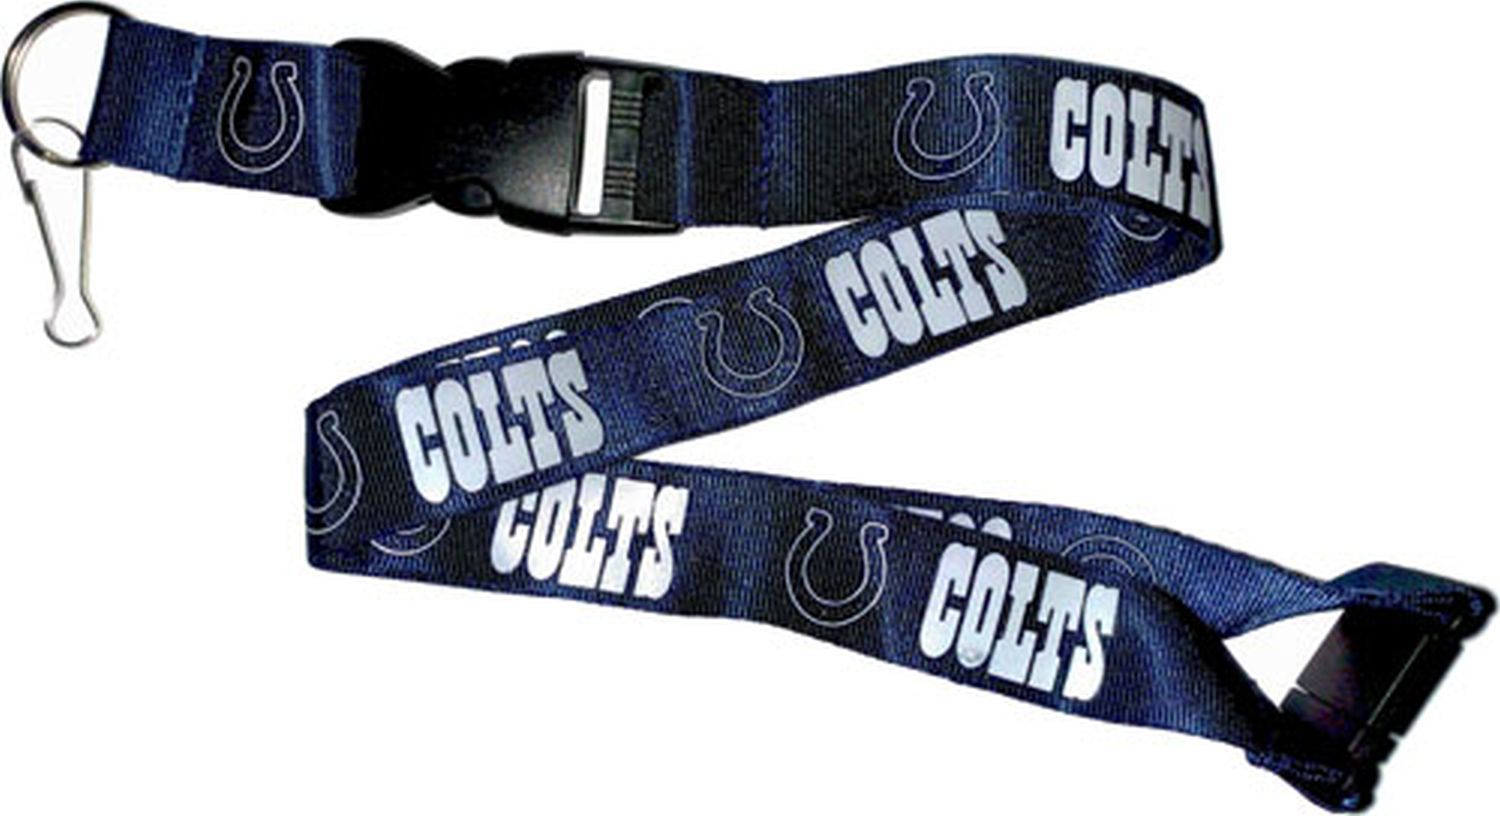 NFL Indianapolis Colts Lanyard - Blue